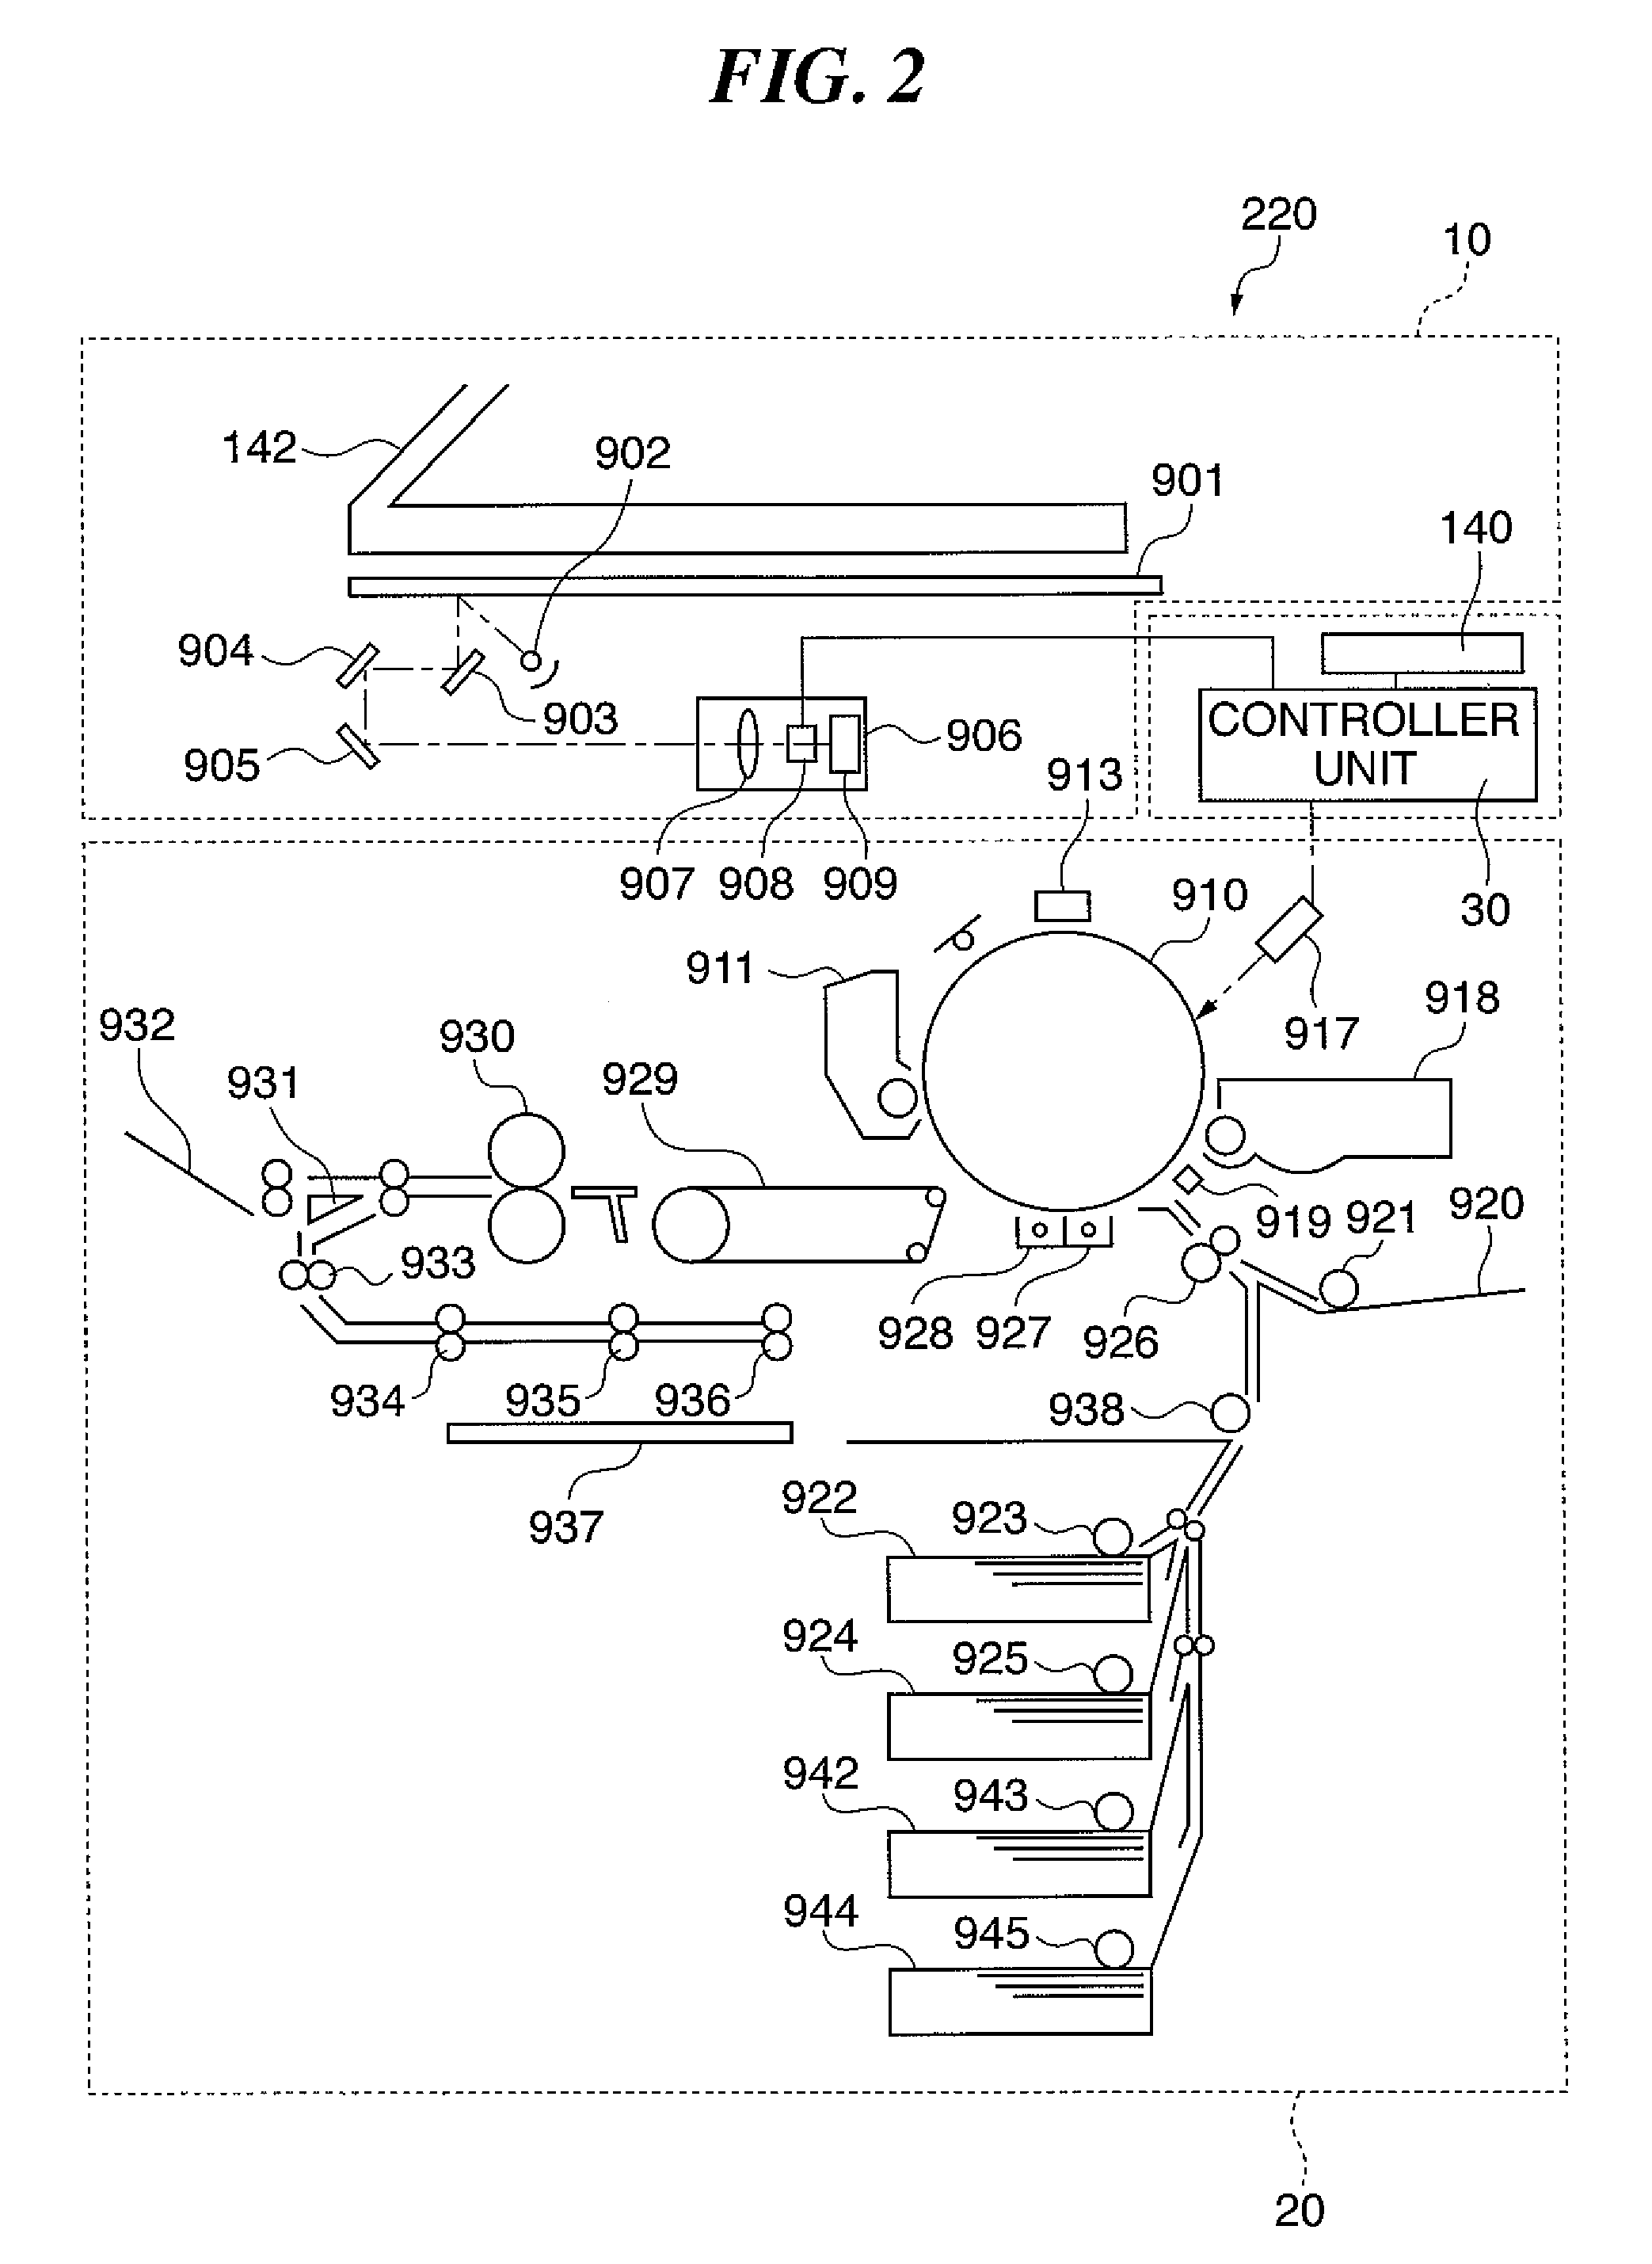 Image forming apparatus and control method therefor, as well as program for implementing the control method